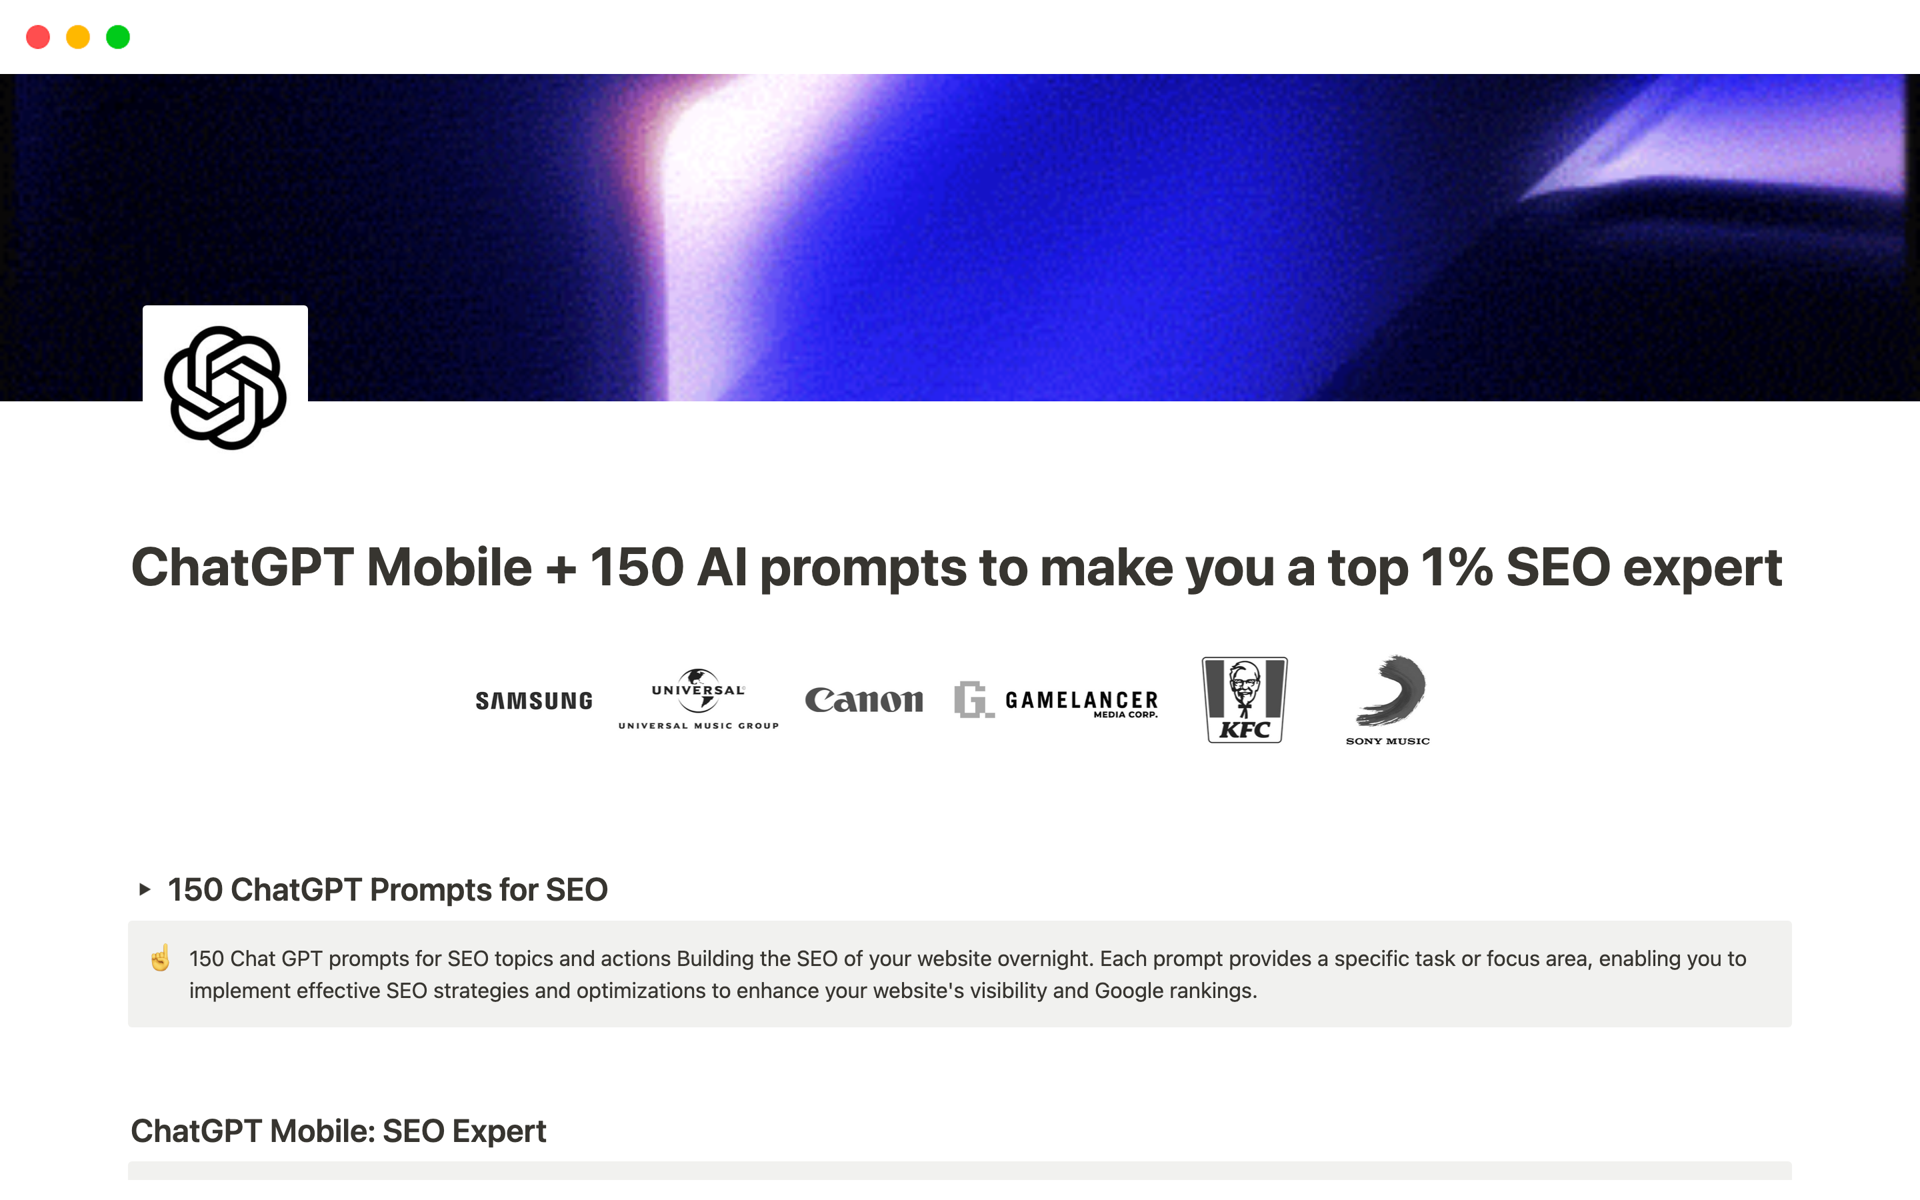 FREE: ChatGPT Mobile + 150 ChatGPT SEO prompts to make you a top 1% SEO expert